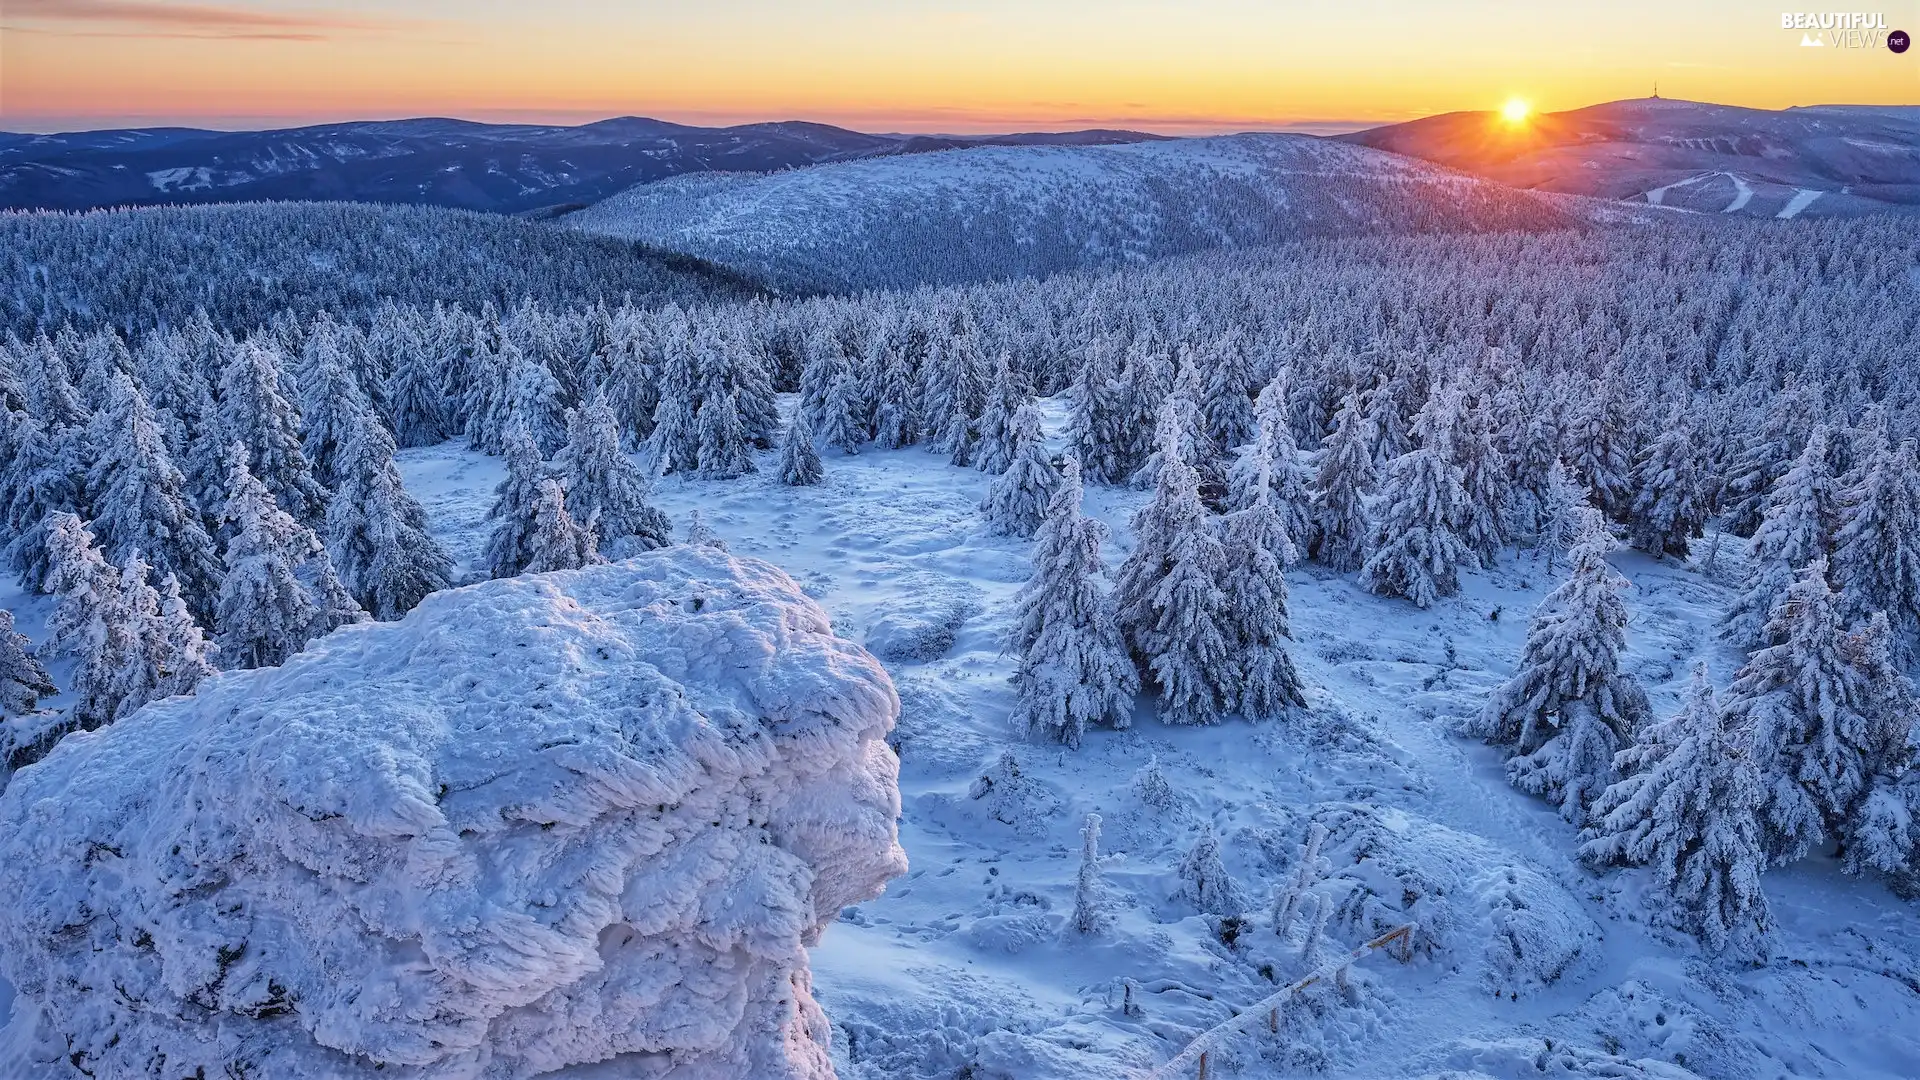 Sunrise, snow, woods, trees, Snowy, Mountains, winter, viewes